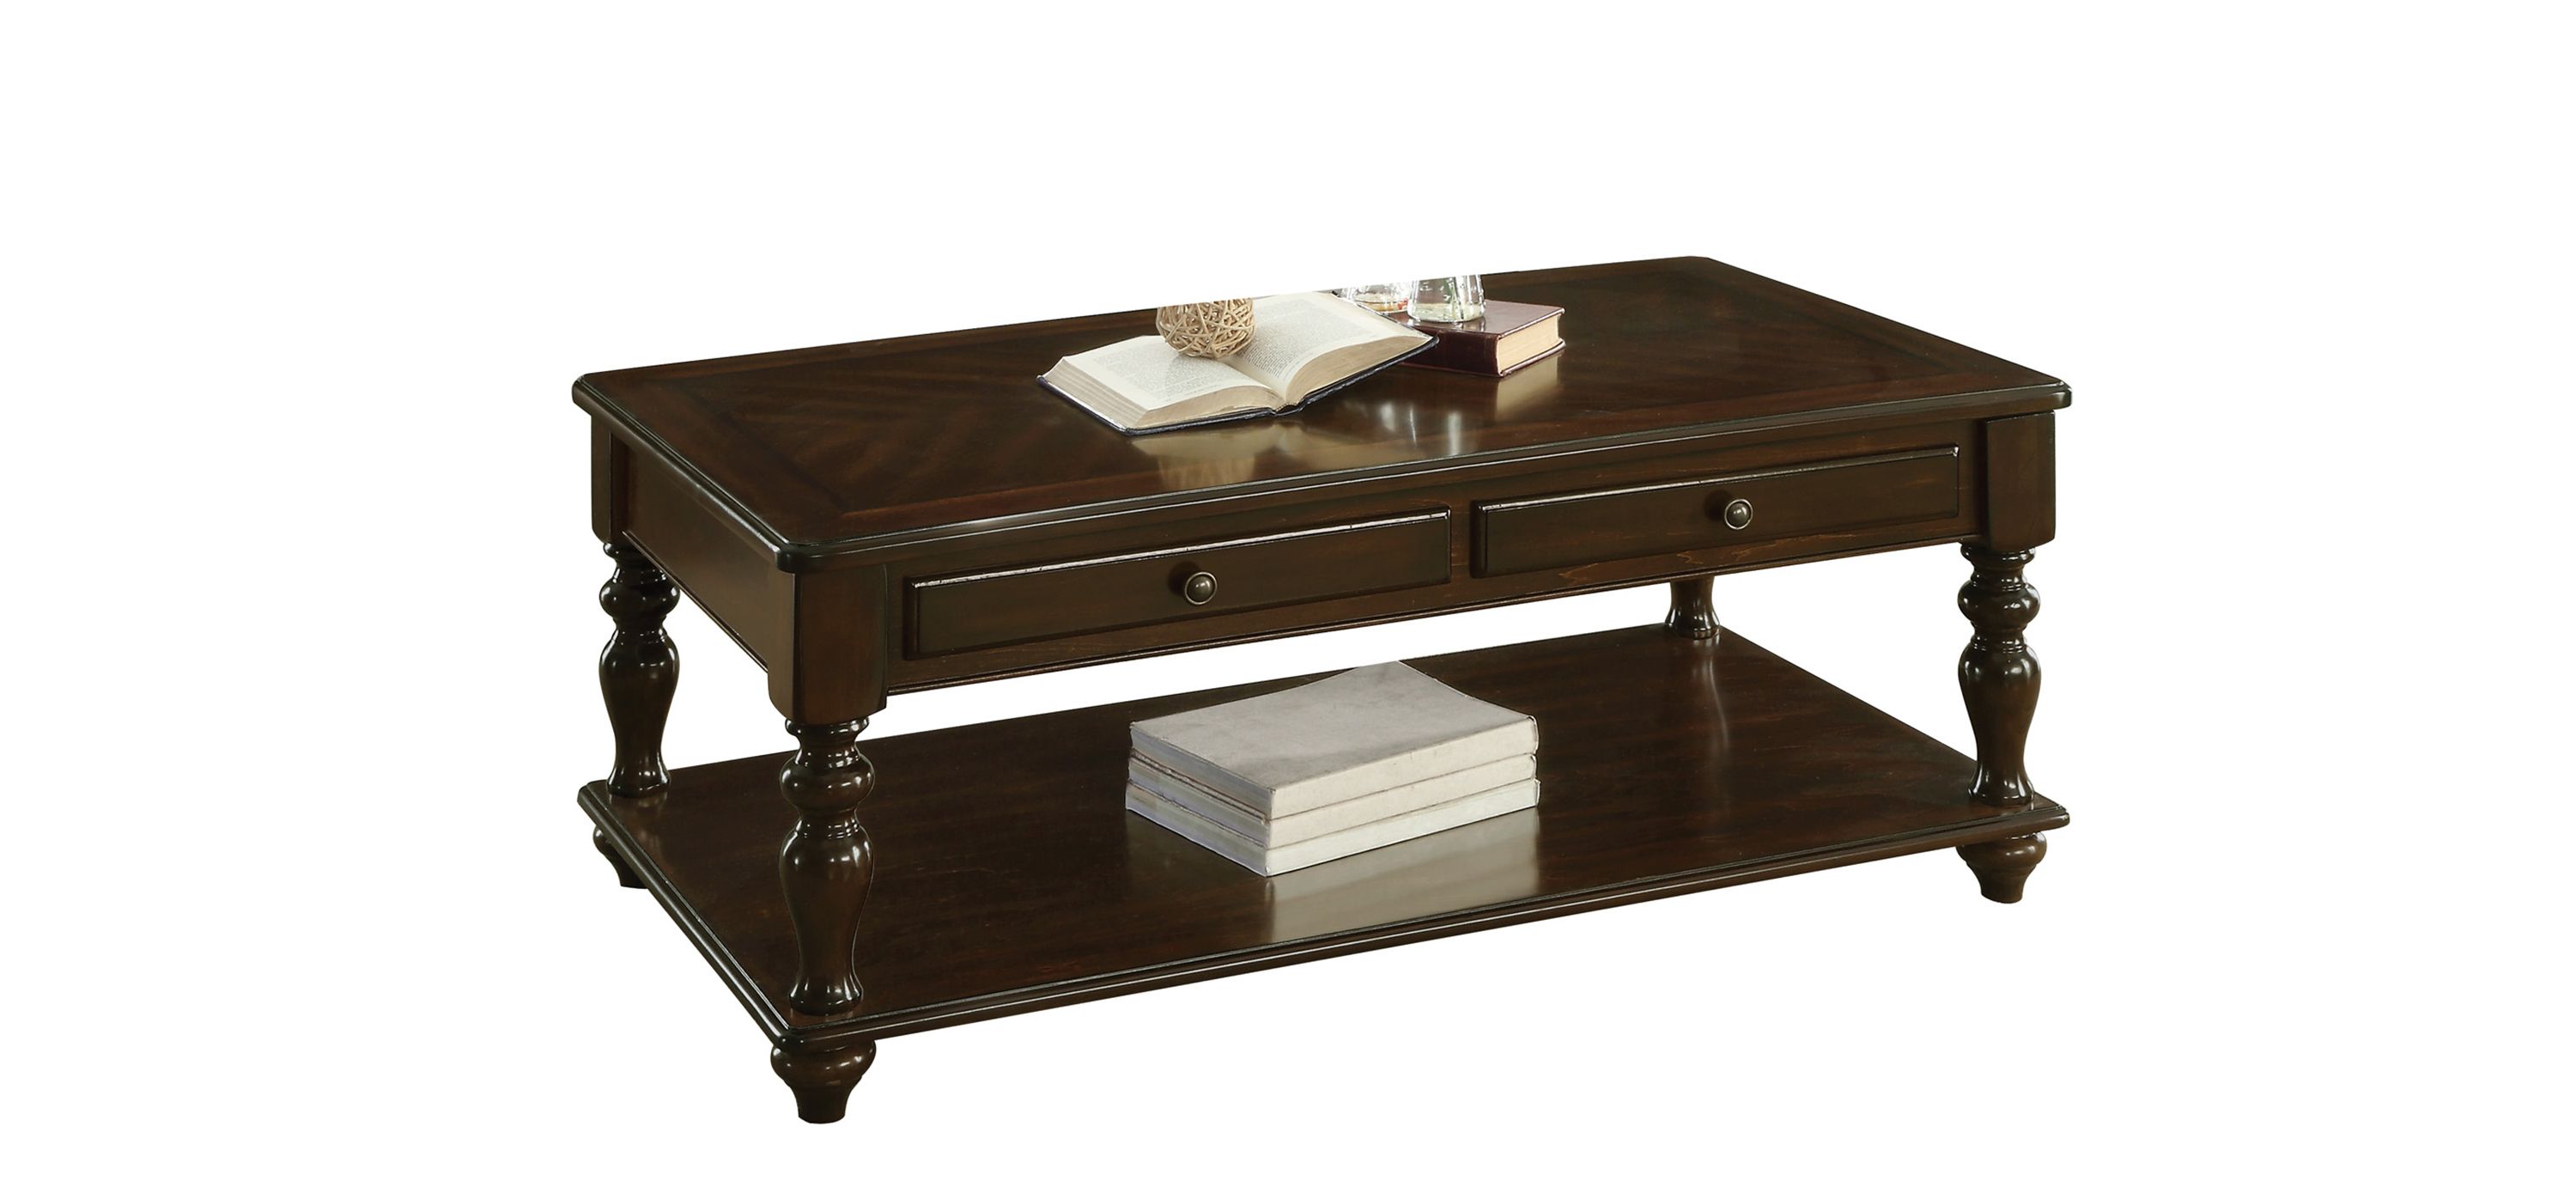 Kendall Rectangular Lift-Top Coffee Table